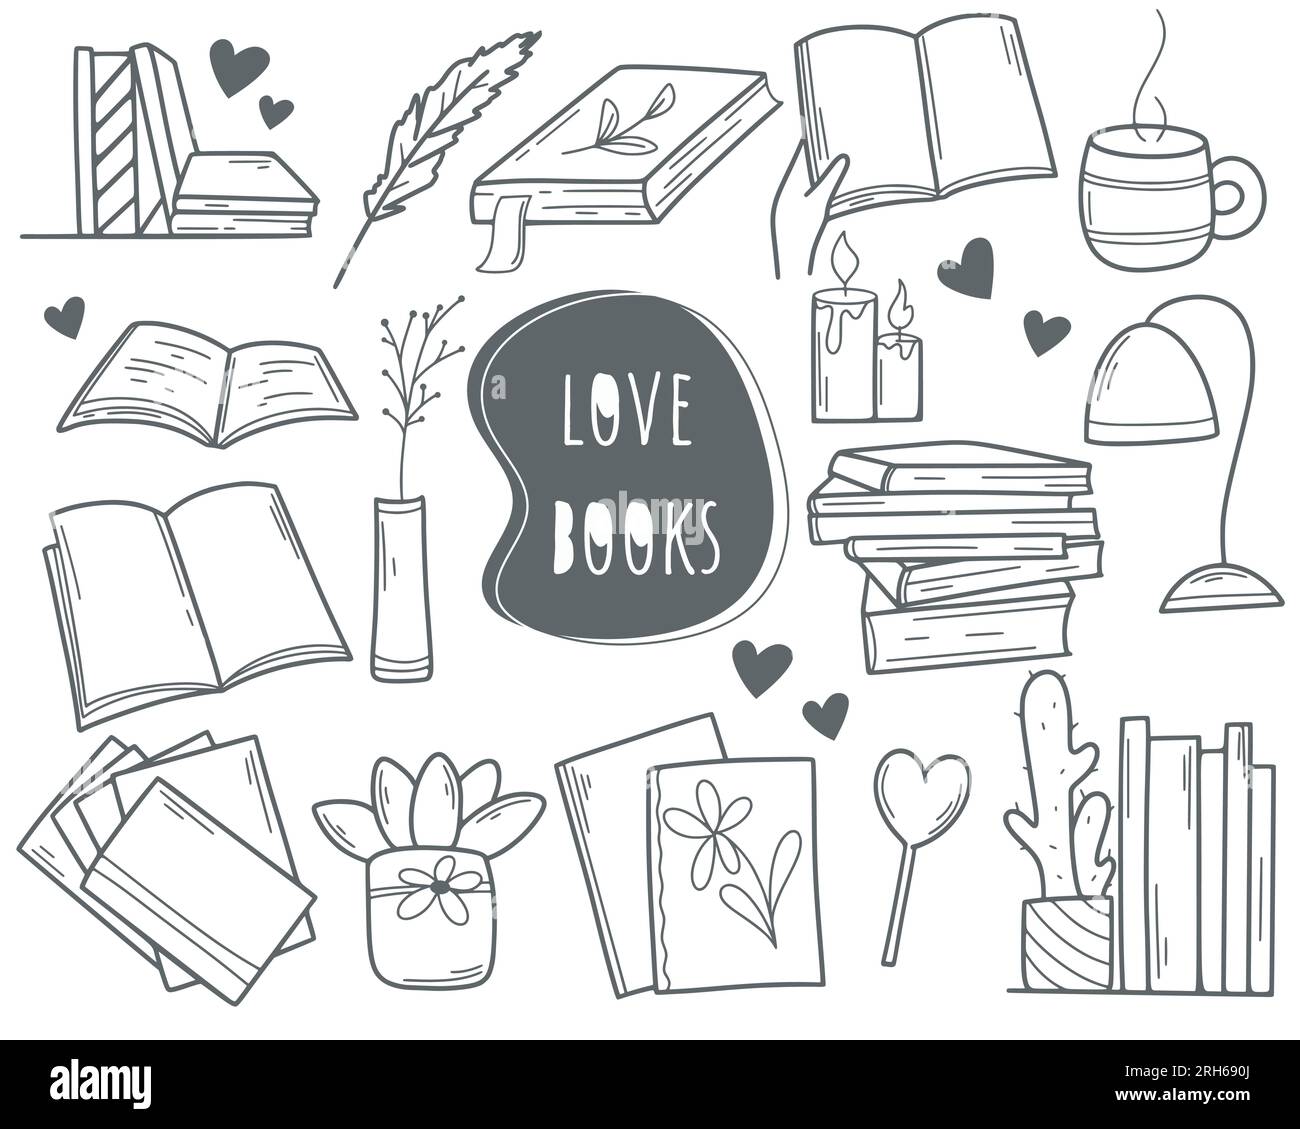 Open Book Hand Drawn Sketch Stock Vector - Illustration of clean